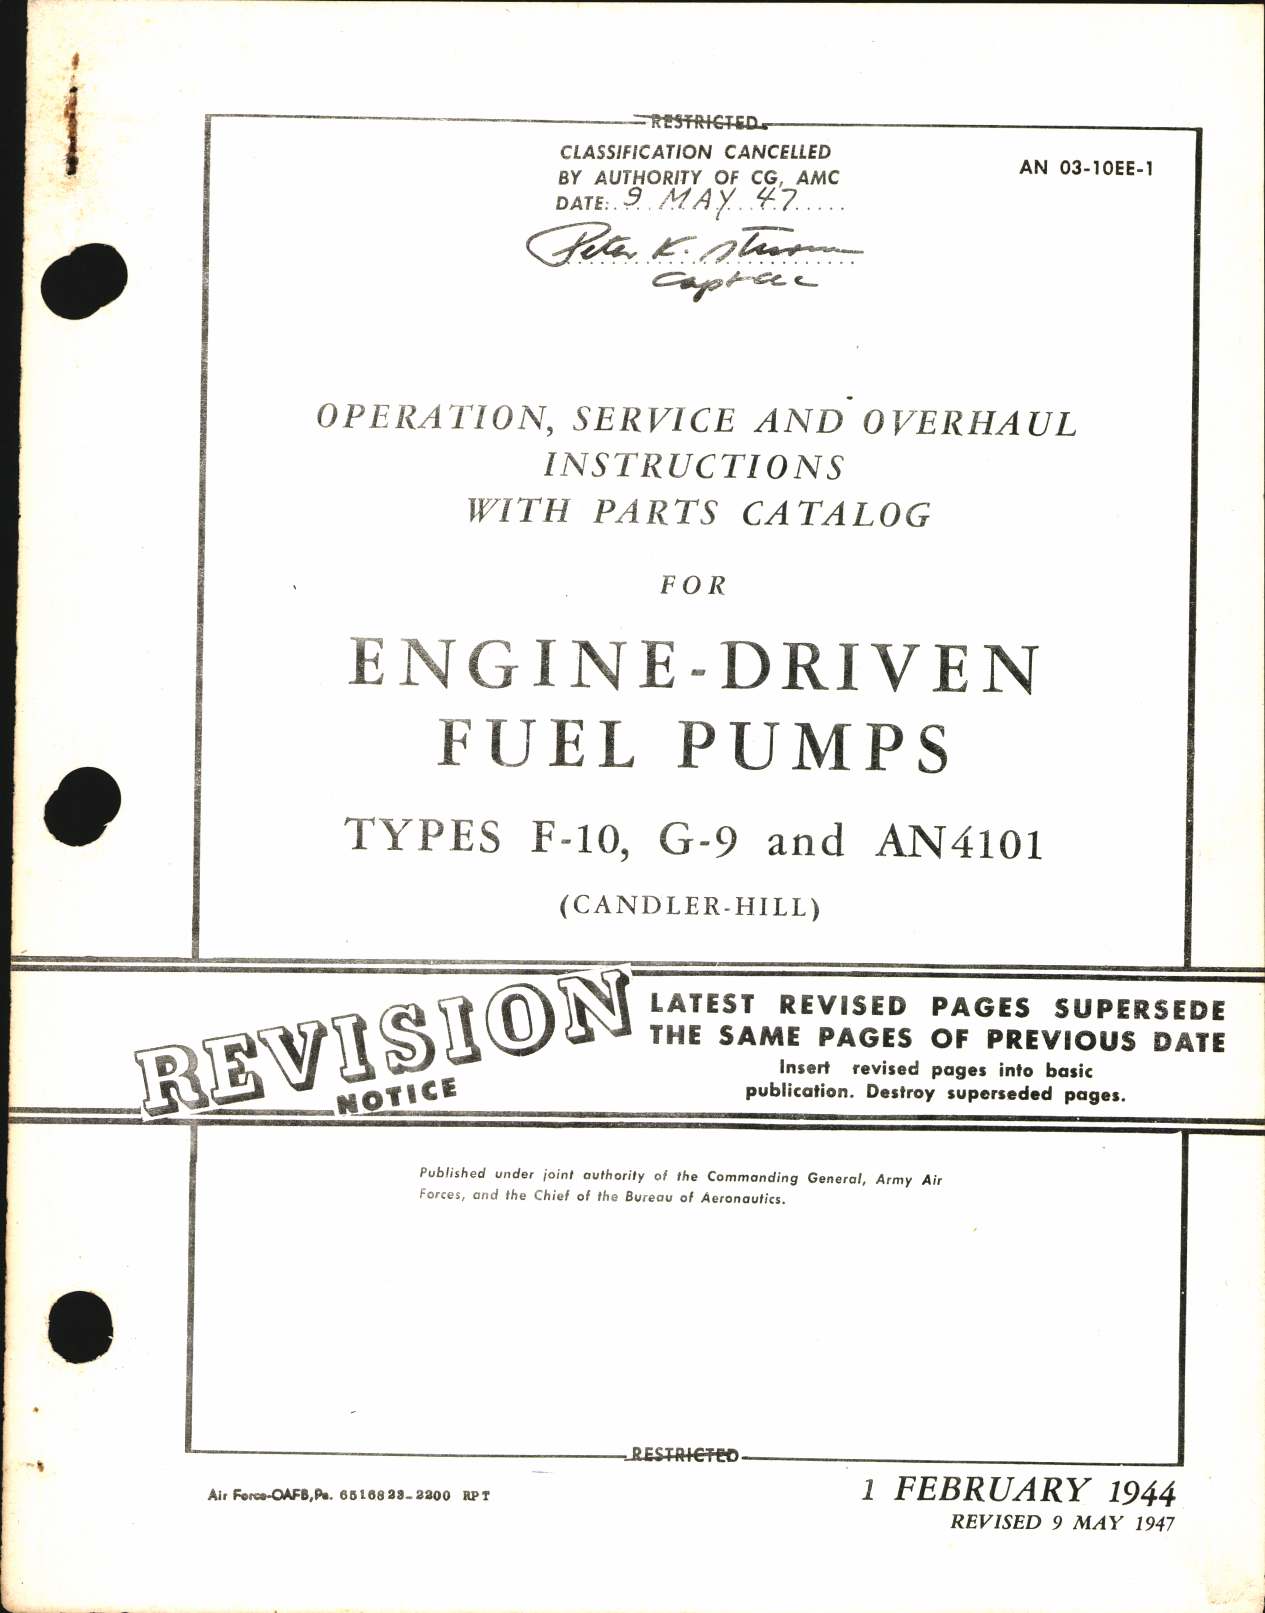 Sample page 1 from AirCorps Library document: Operation, Service, & Overhaul Instructions with Parts Catalog for Engine-Driven Fuel Pumps